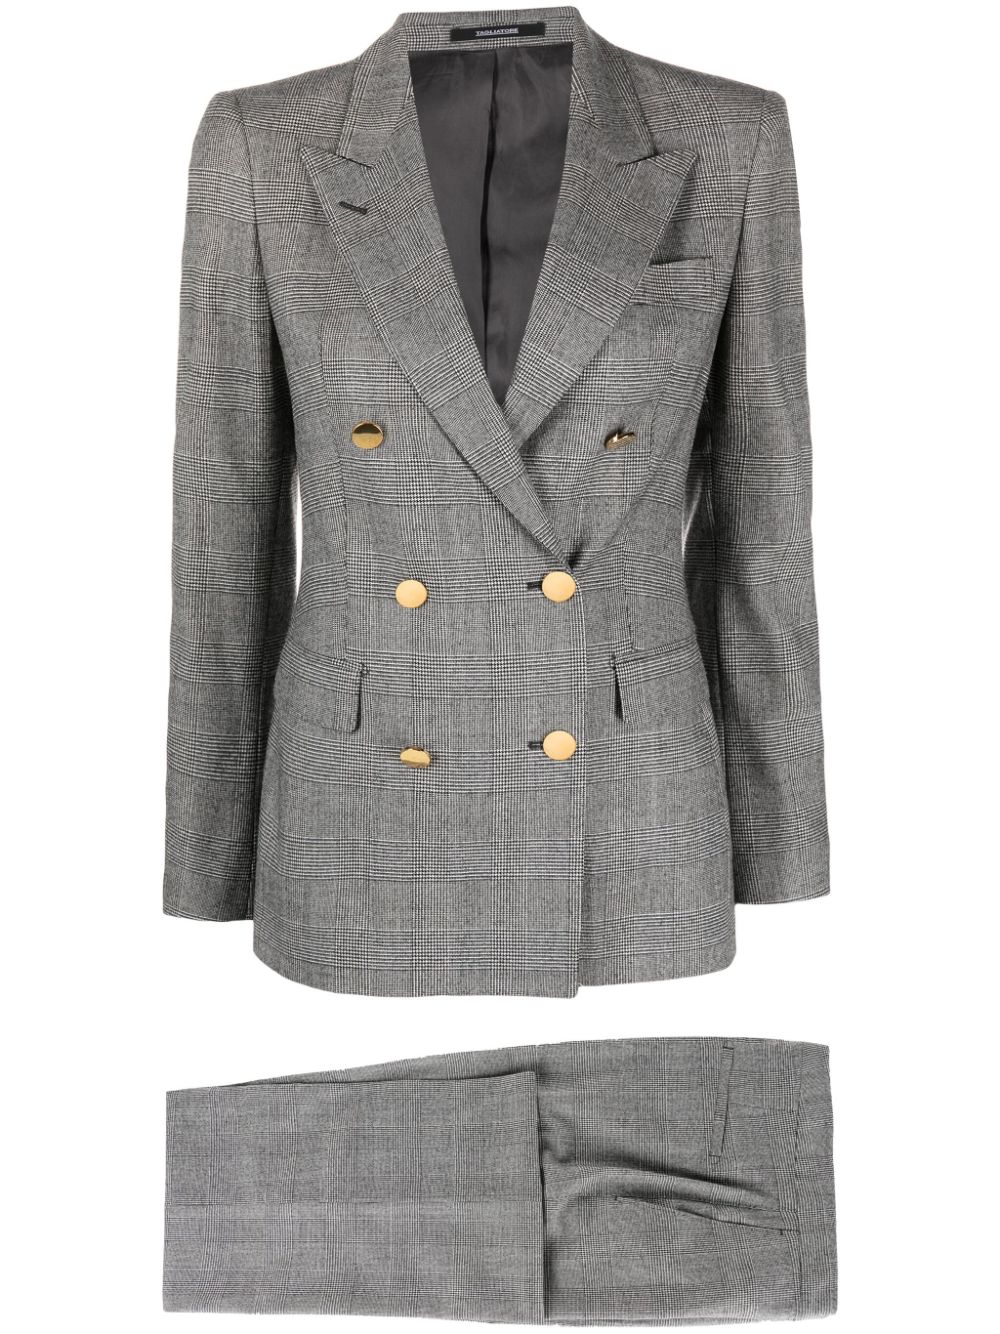 TAGLIATORE PLAID-CHECK DOUBLE-BREASTED SUIT